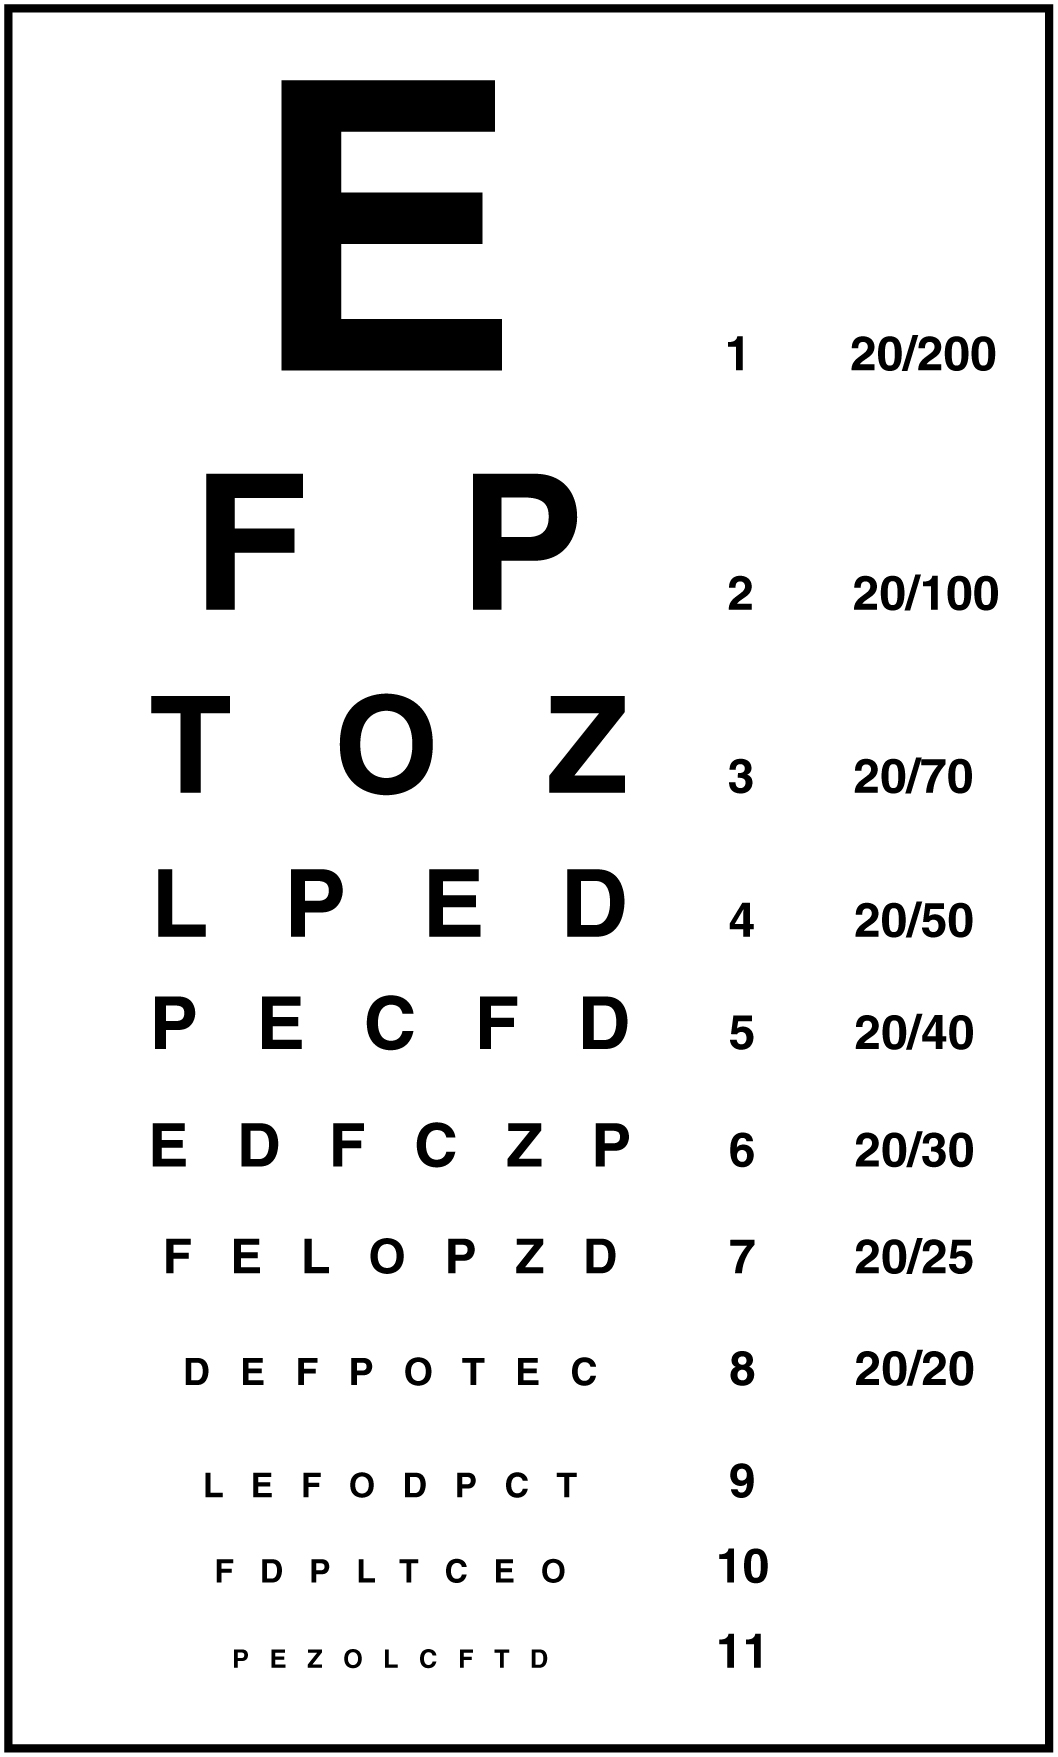 This figure shows a chart that is used for eye exams.